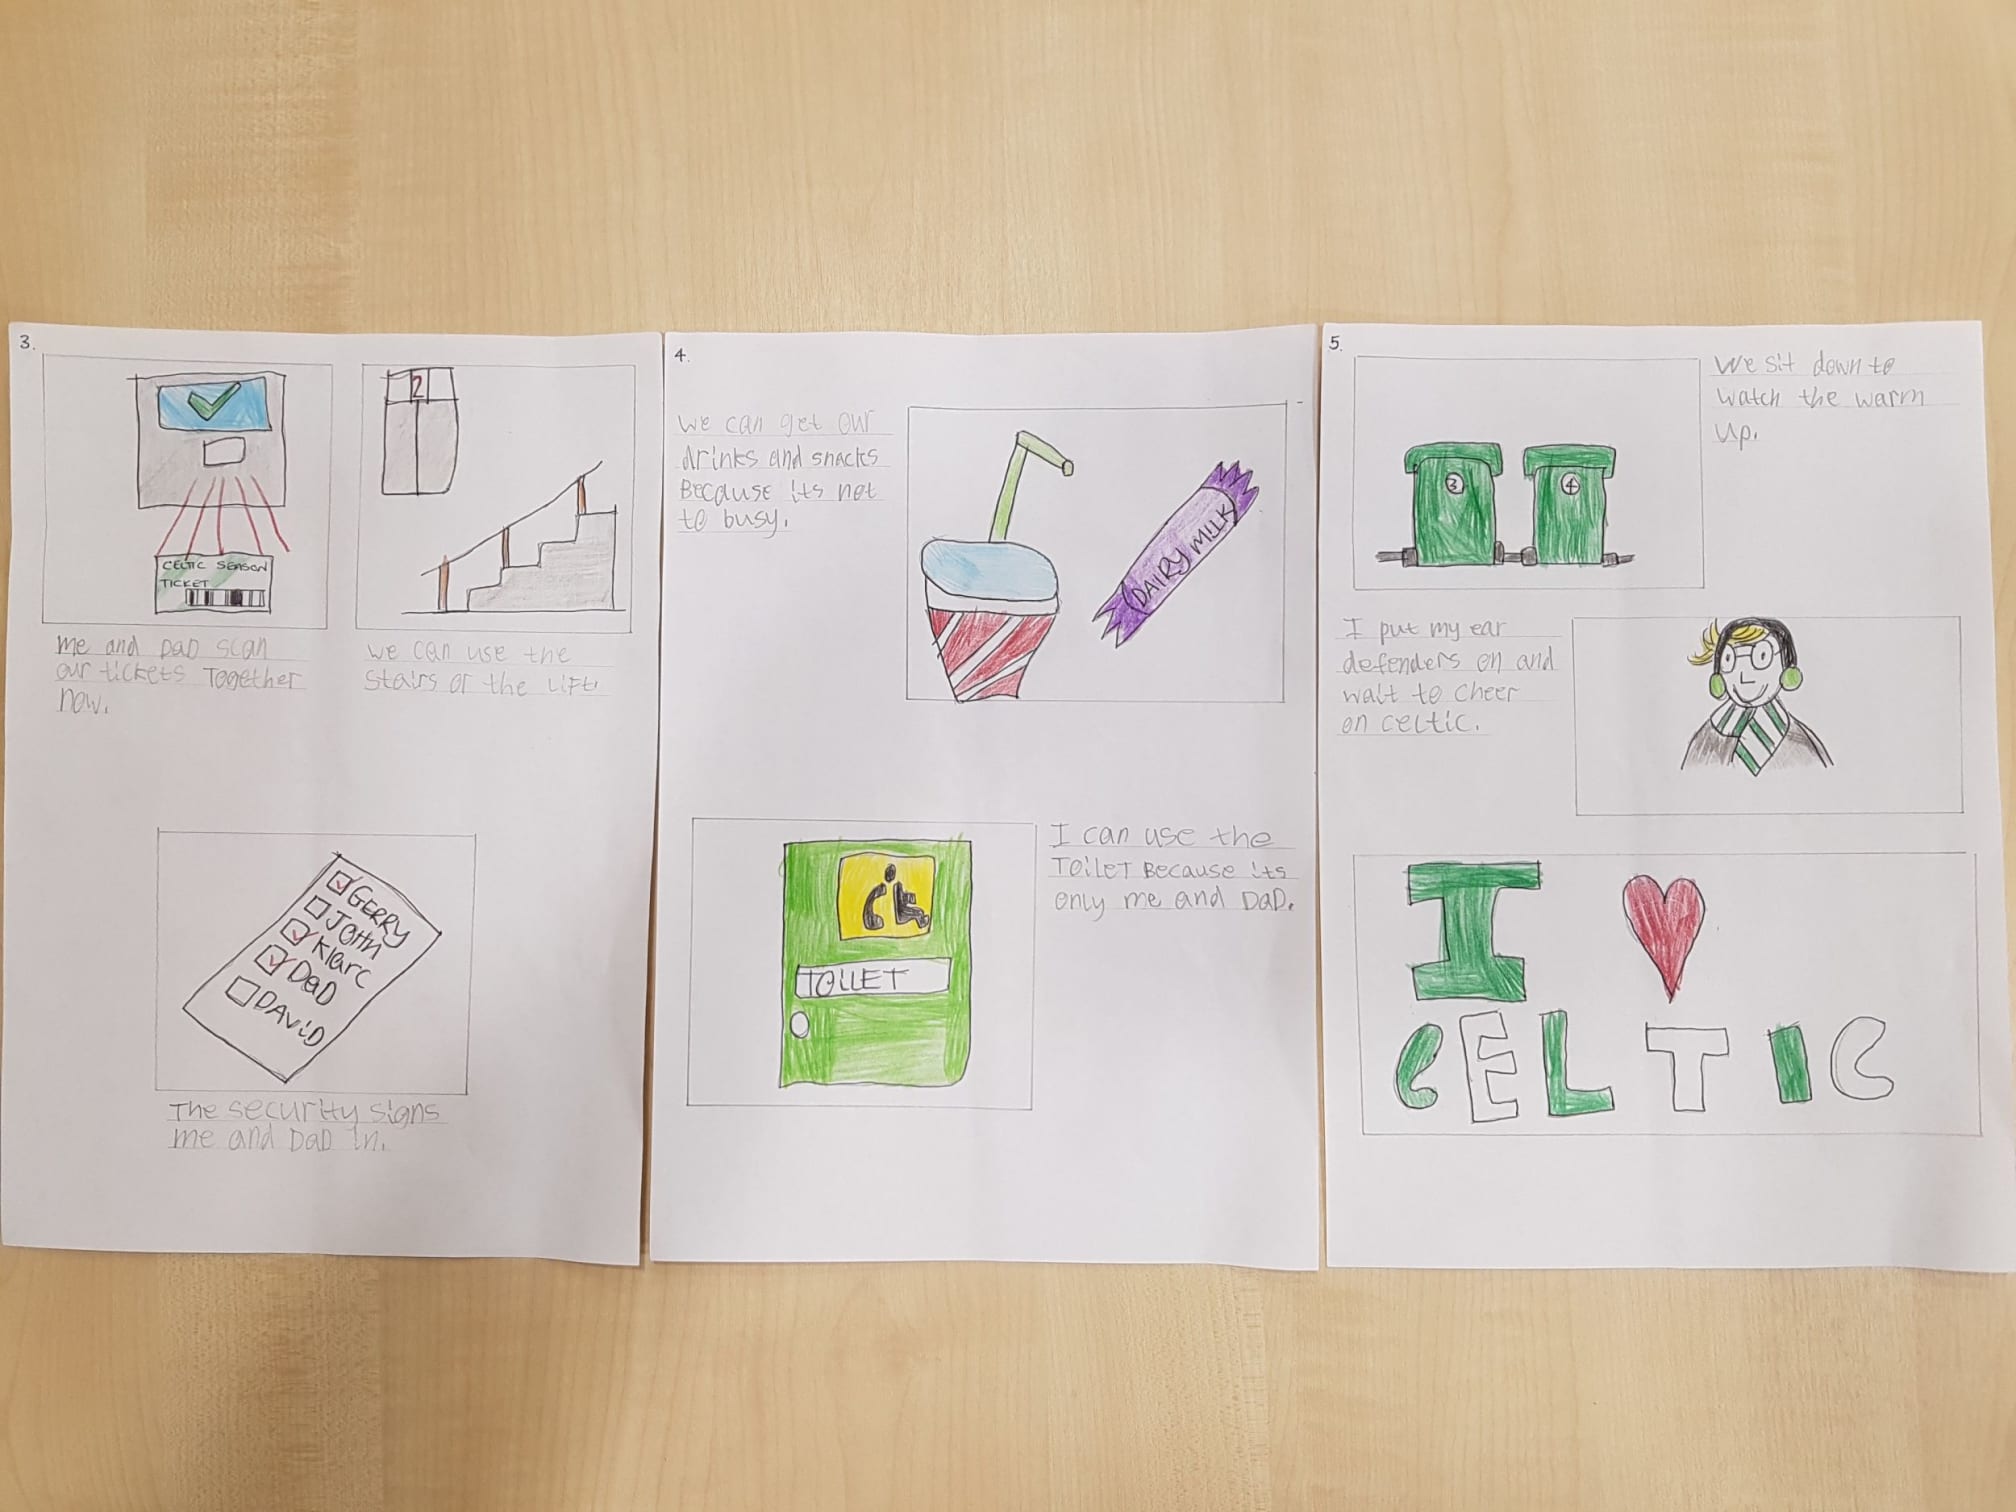 Drawings by a young autistic celtic fan after their visit to Celtic Park and the Club